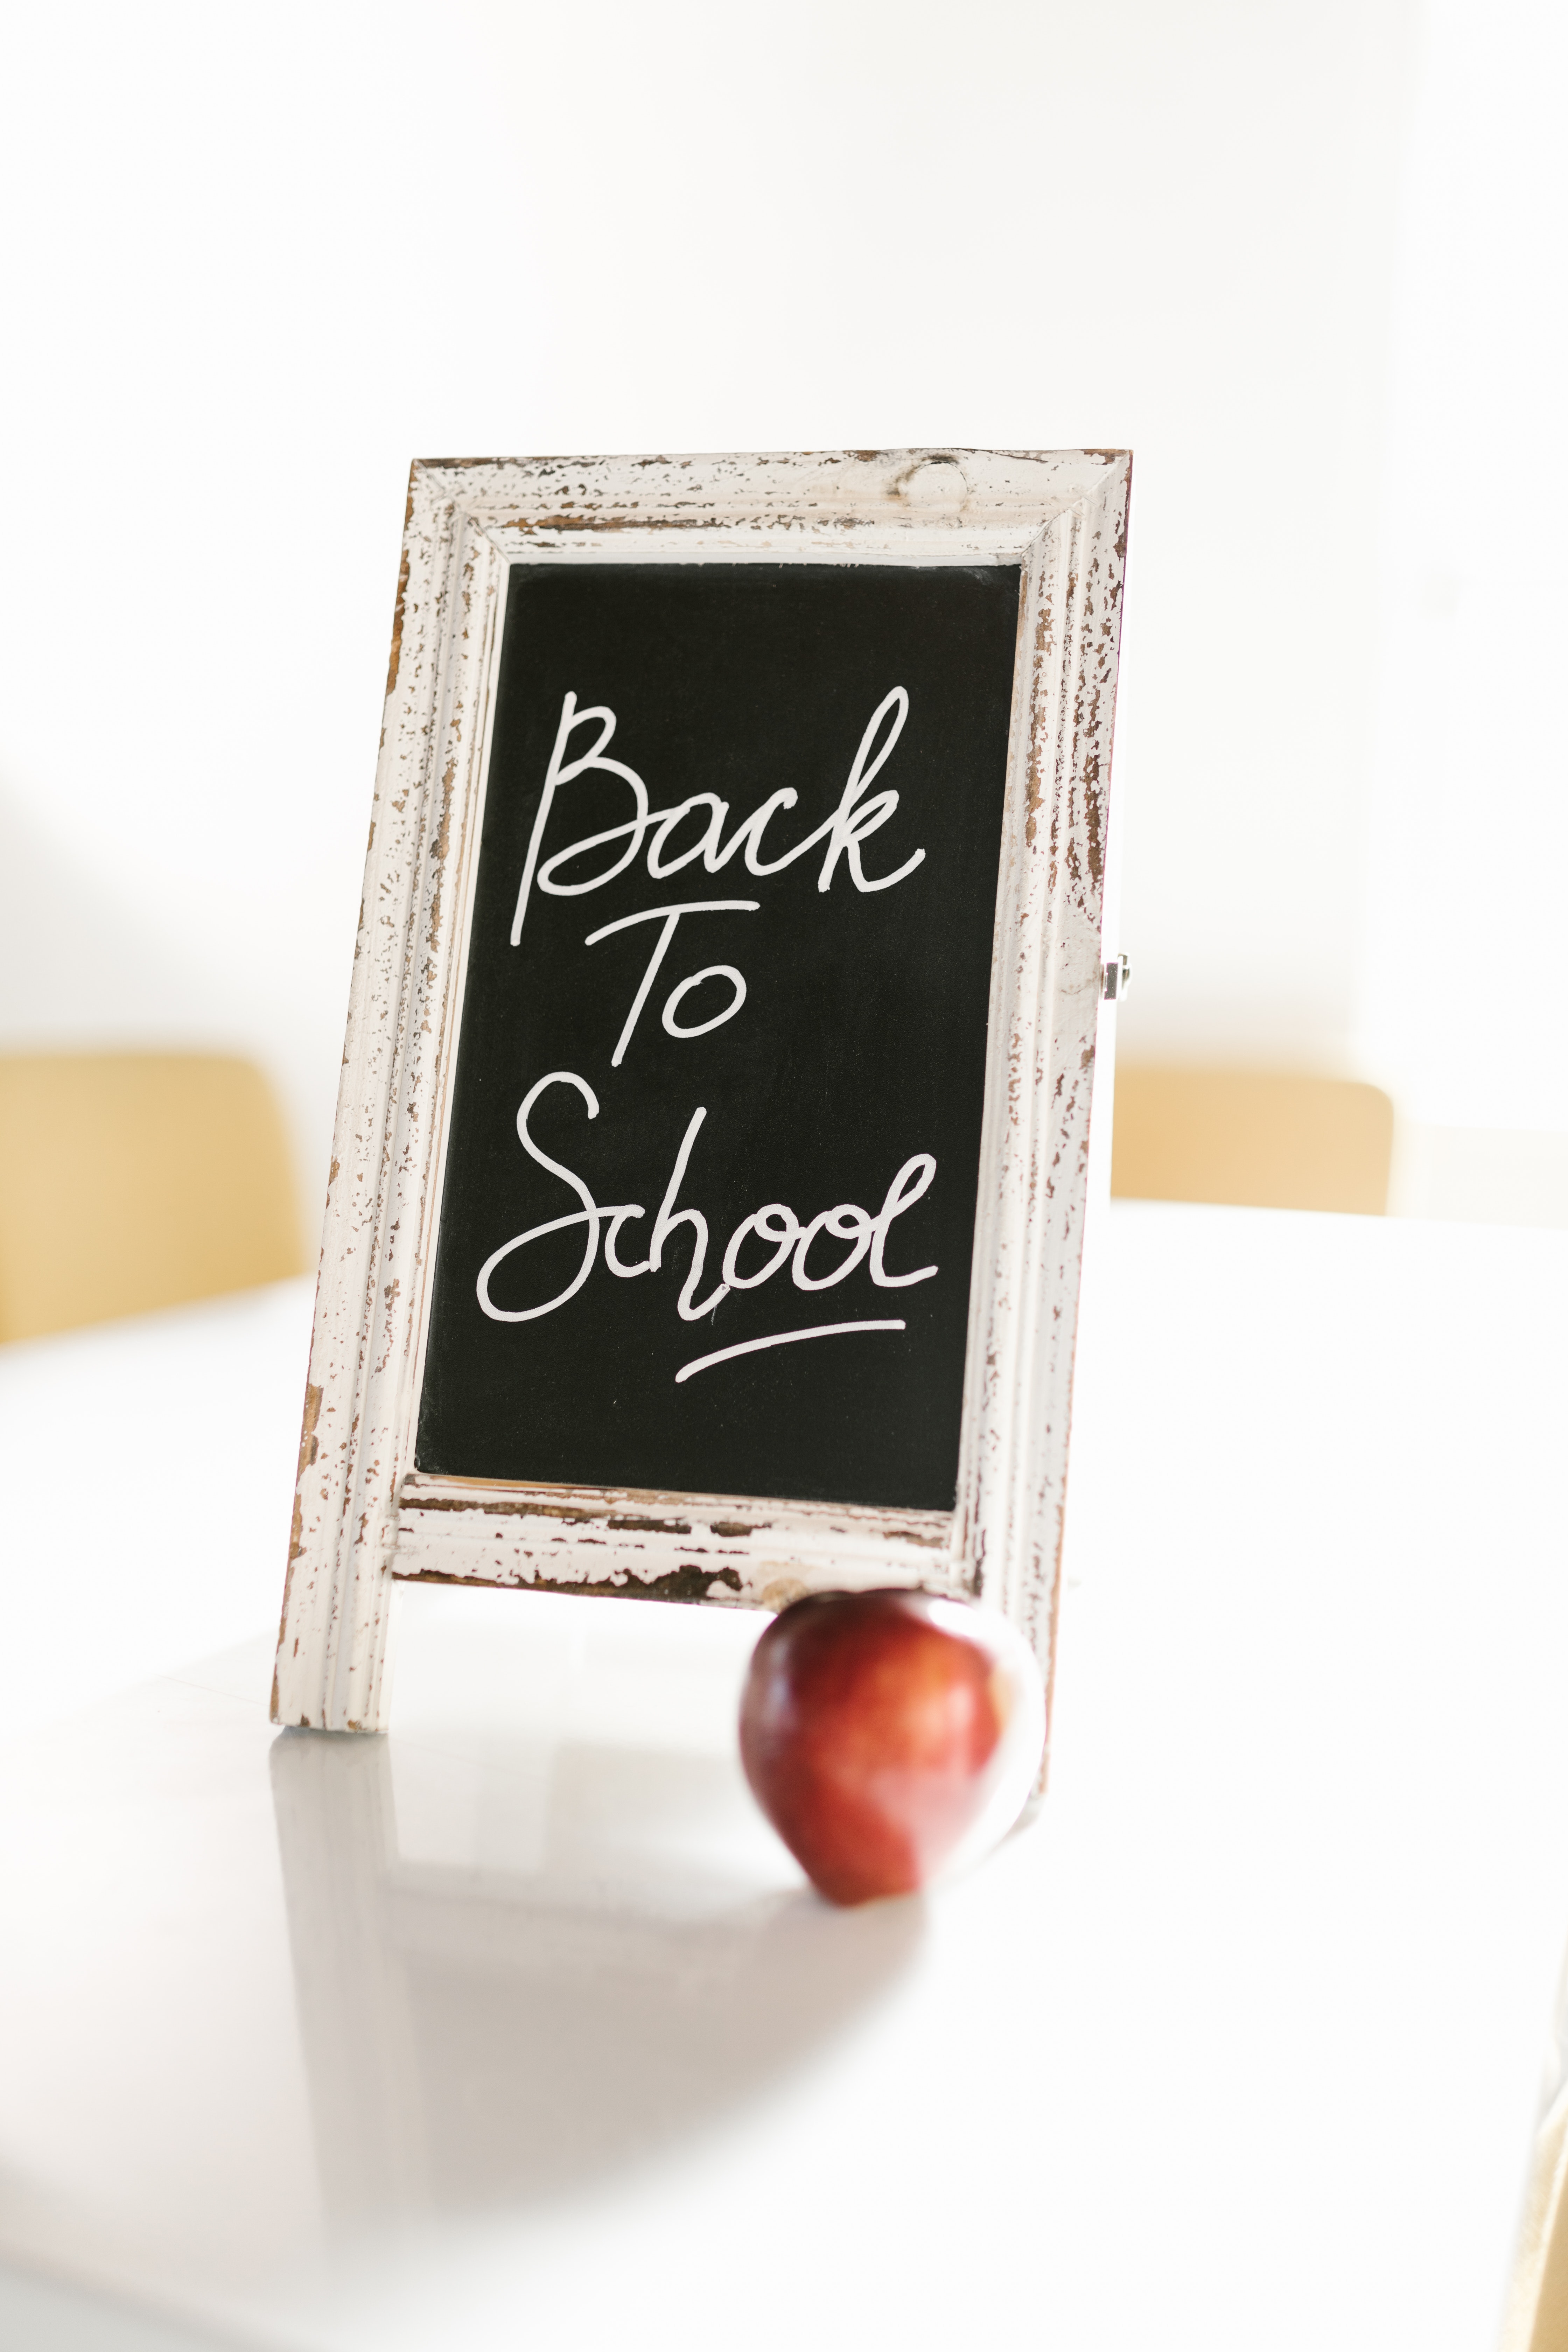 back to school written on a chalkboard with apple at base